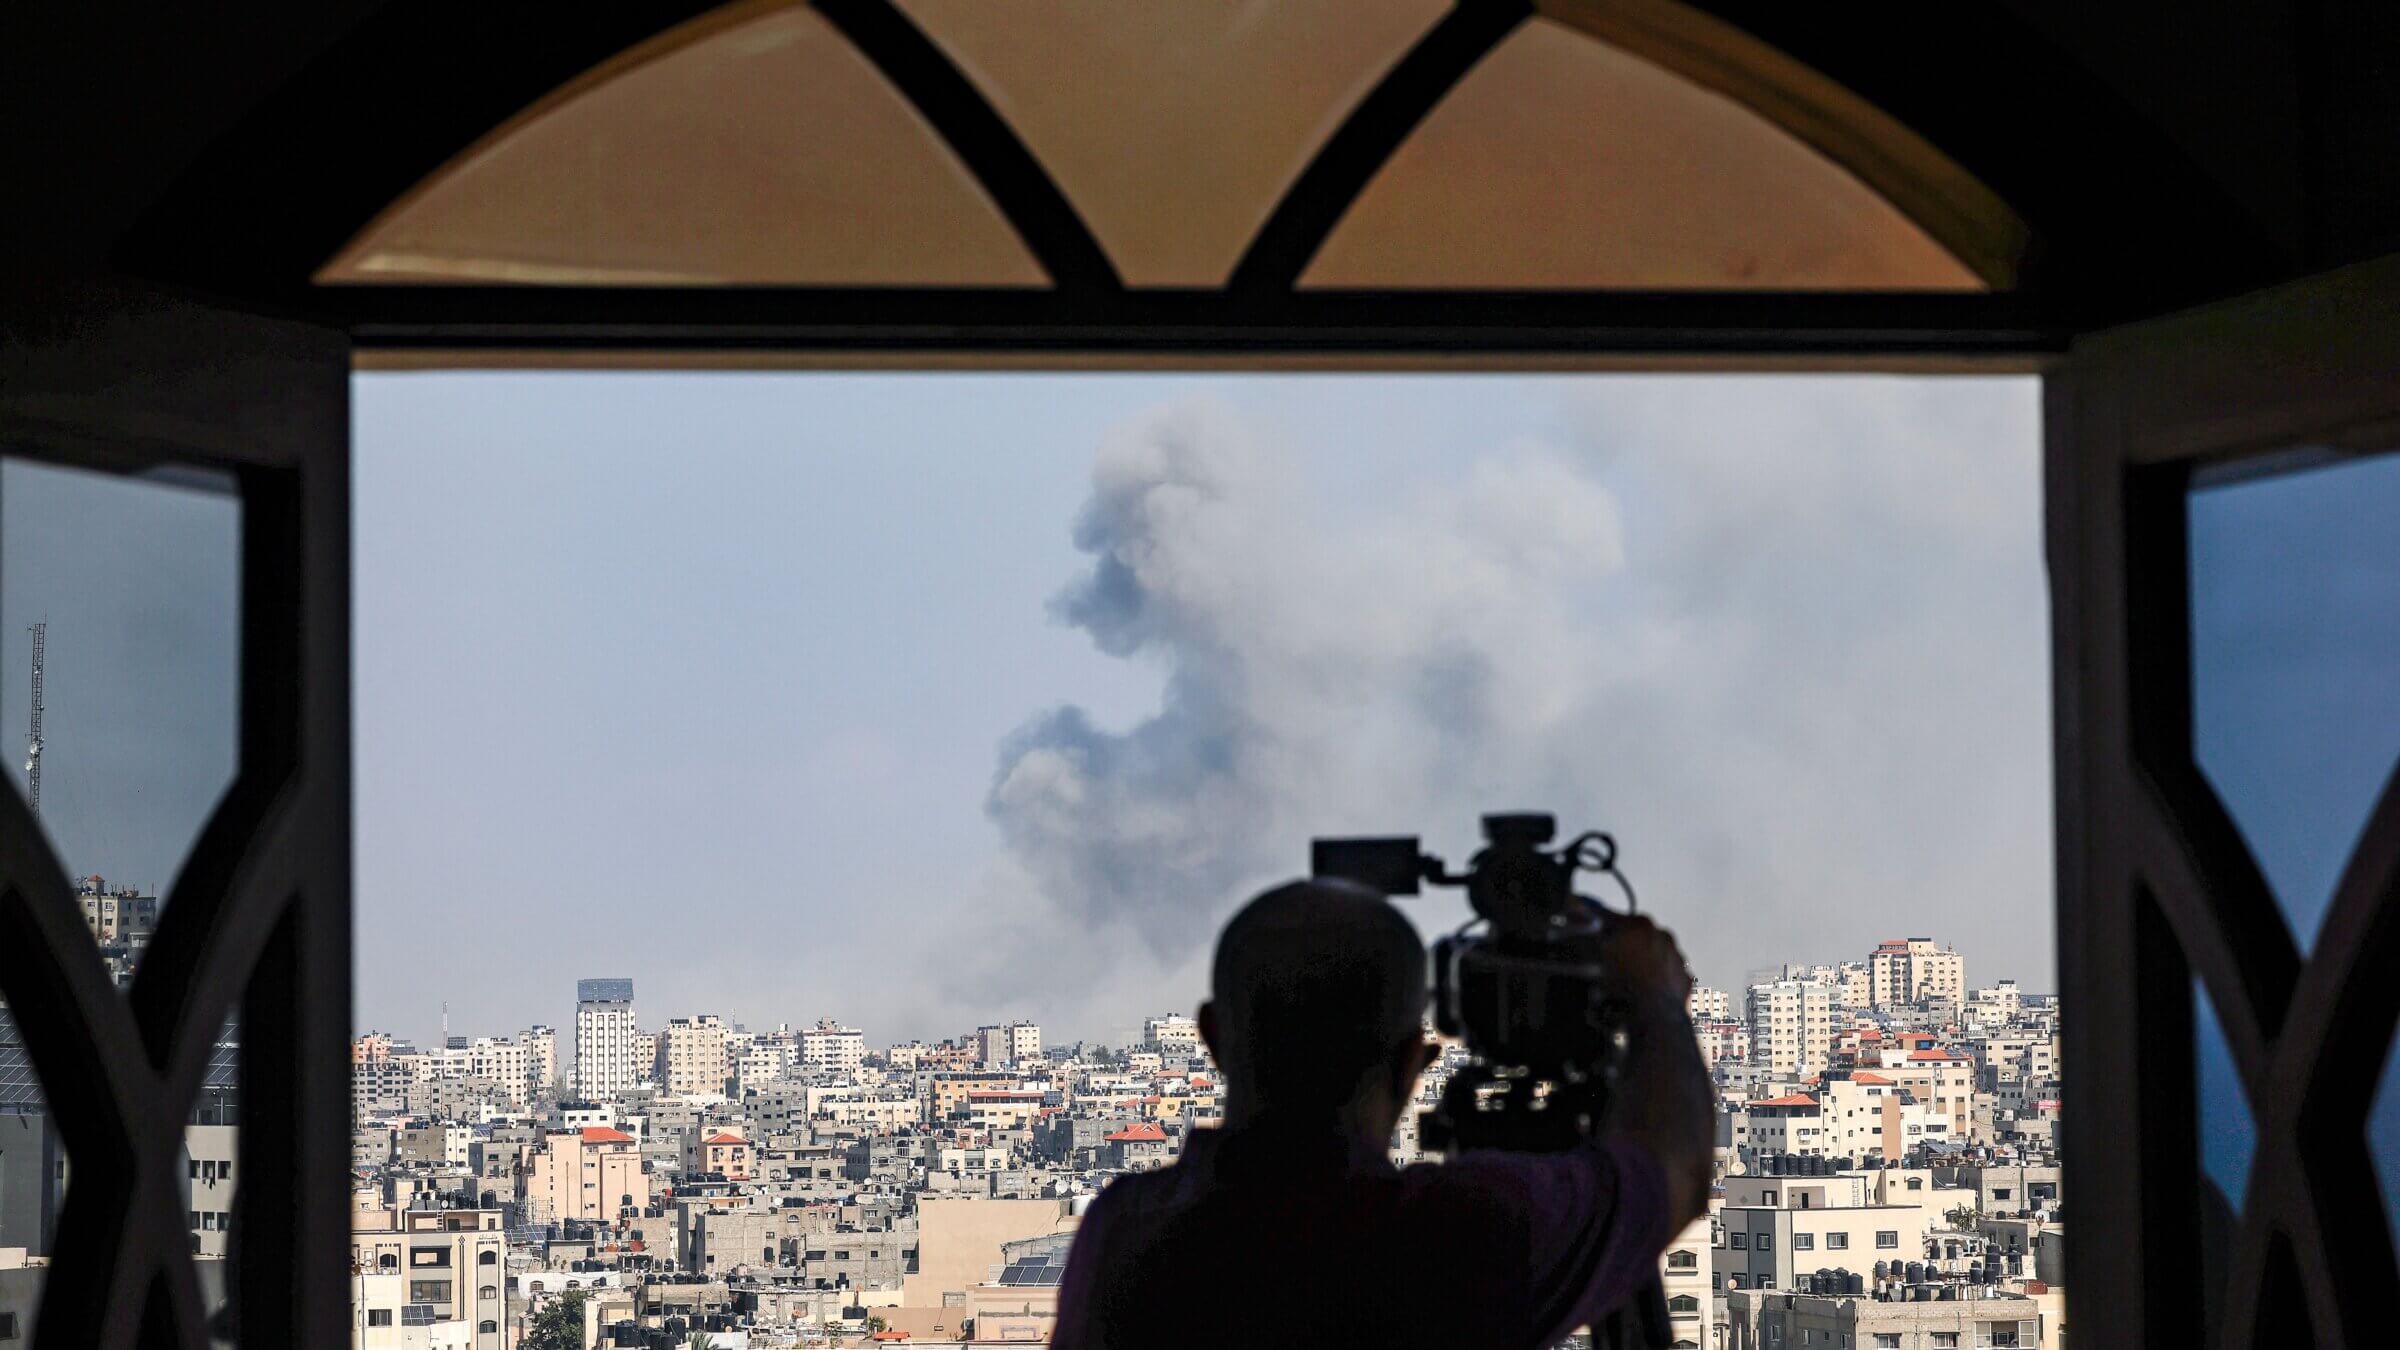 A cameraman films while smoke plumes billow during Israeli air strikes in Gaza City Thursday. Palestinian Americans are watching the conflict unfold with mounting dread, as the U.S. government has thrown its weight behind Israeli military action.